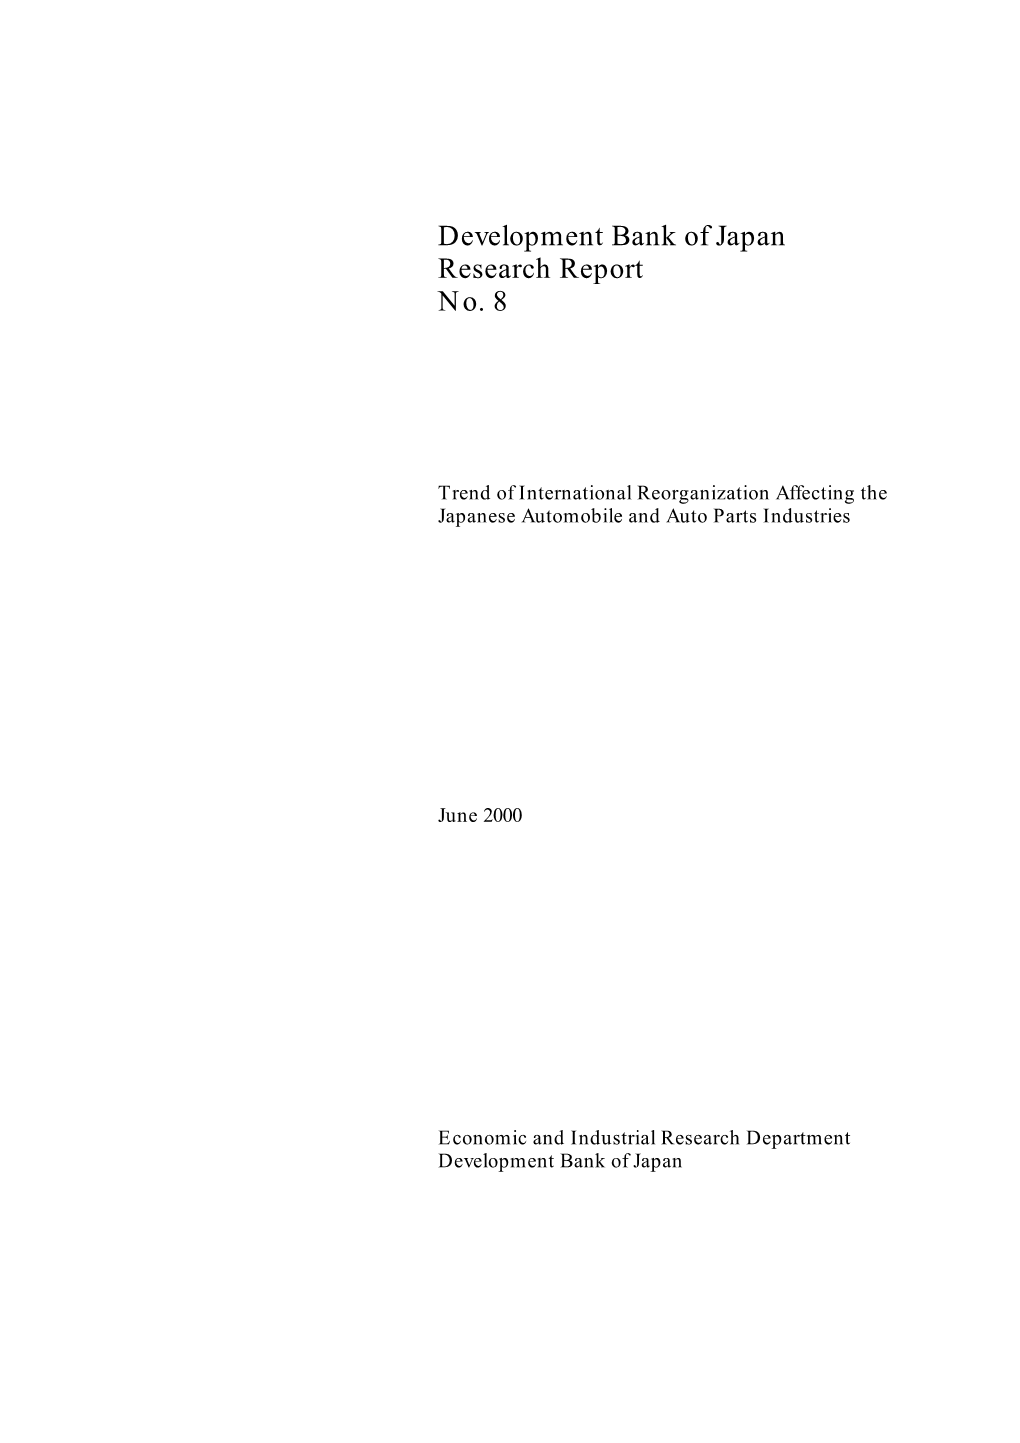 Development Bank of Japan Research Report No. 8